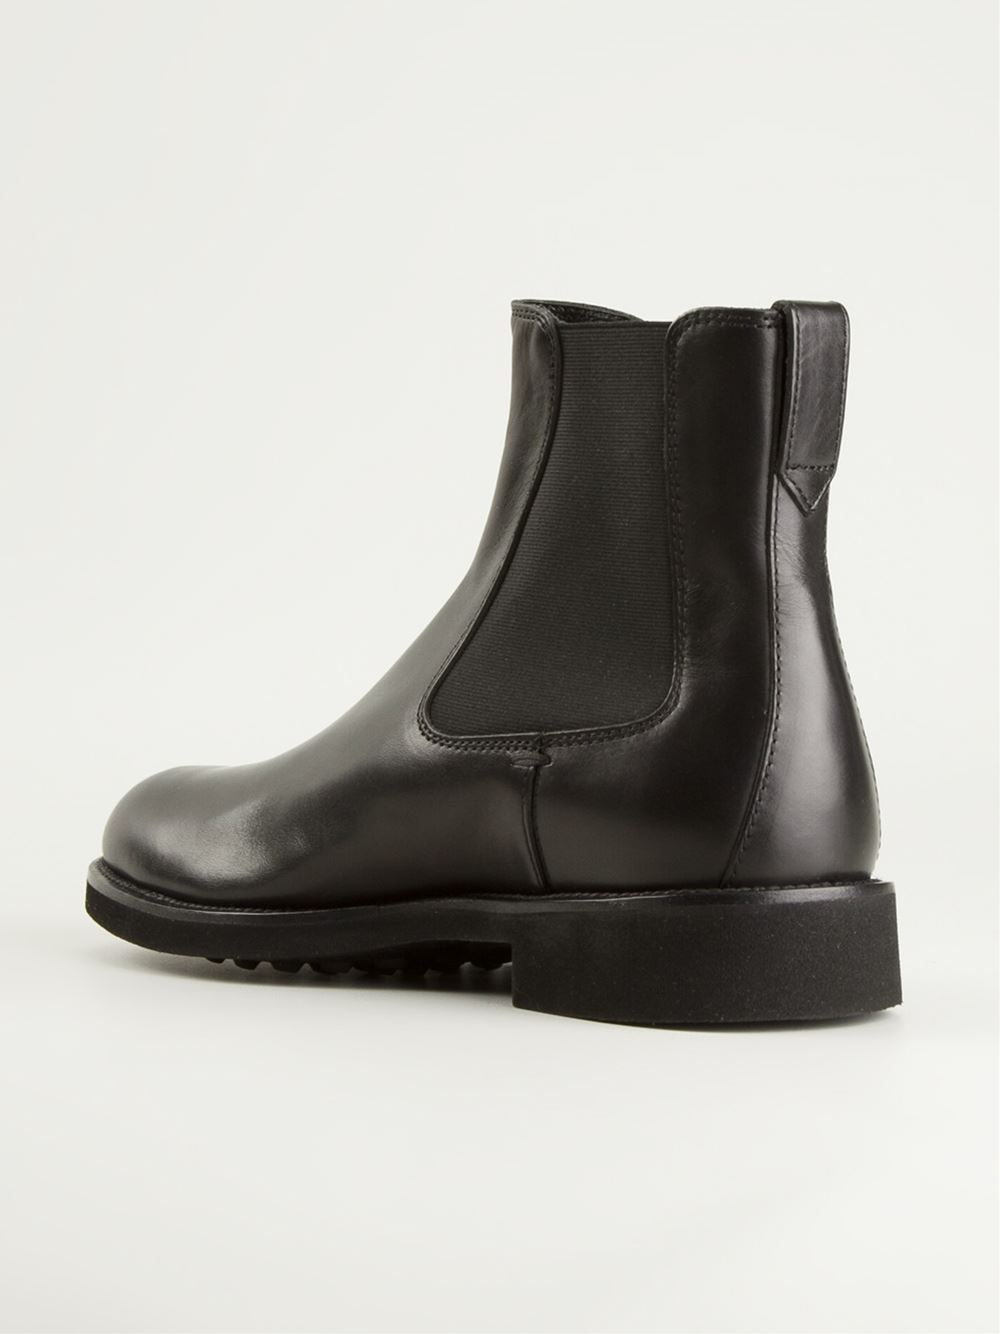 Tod's Chelsea Boots in Black for Men - Lyst